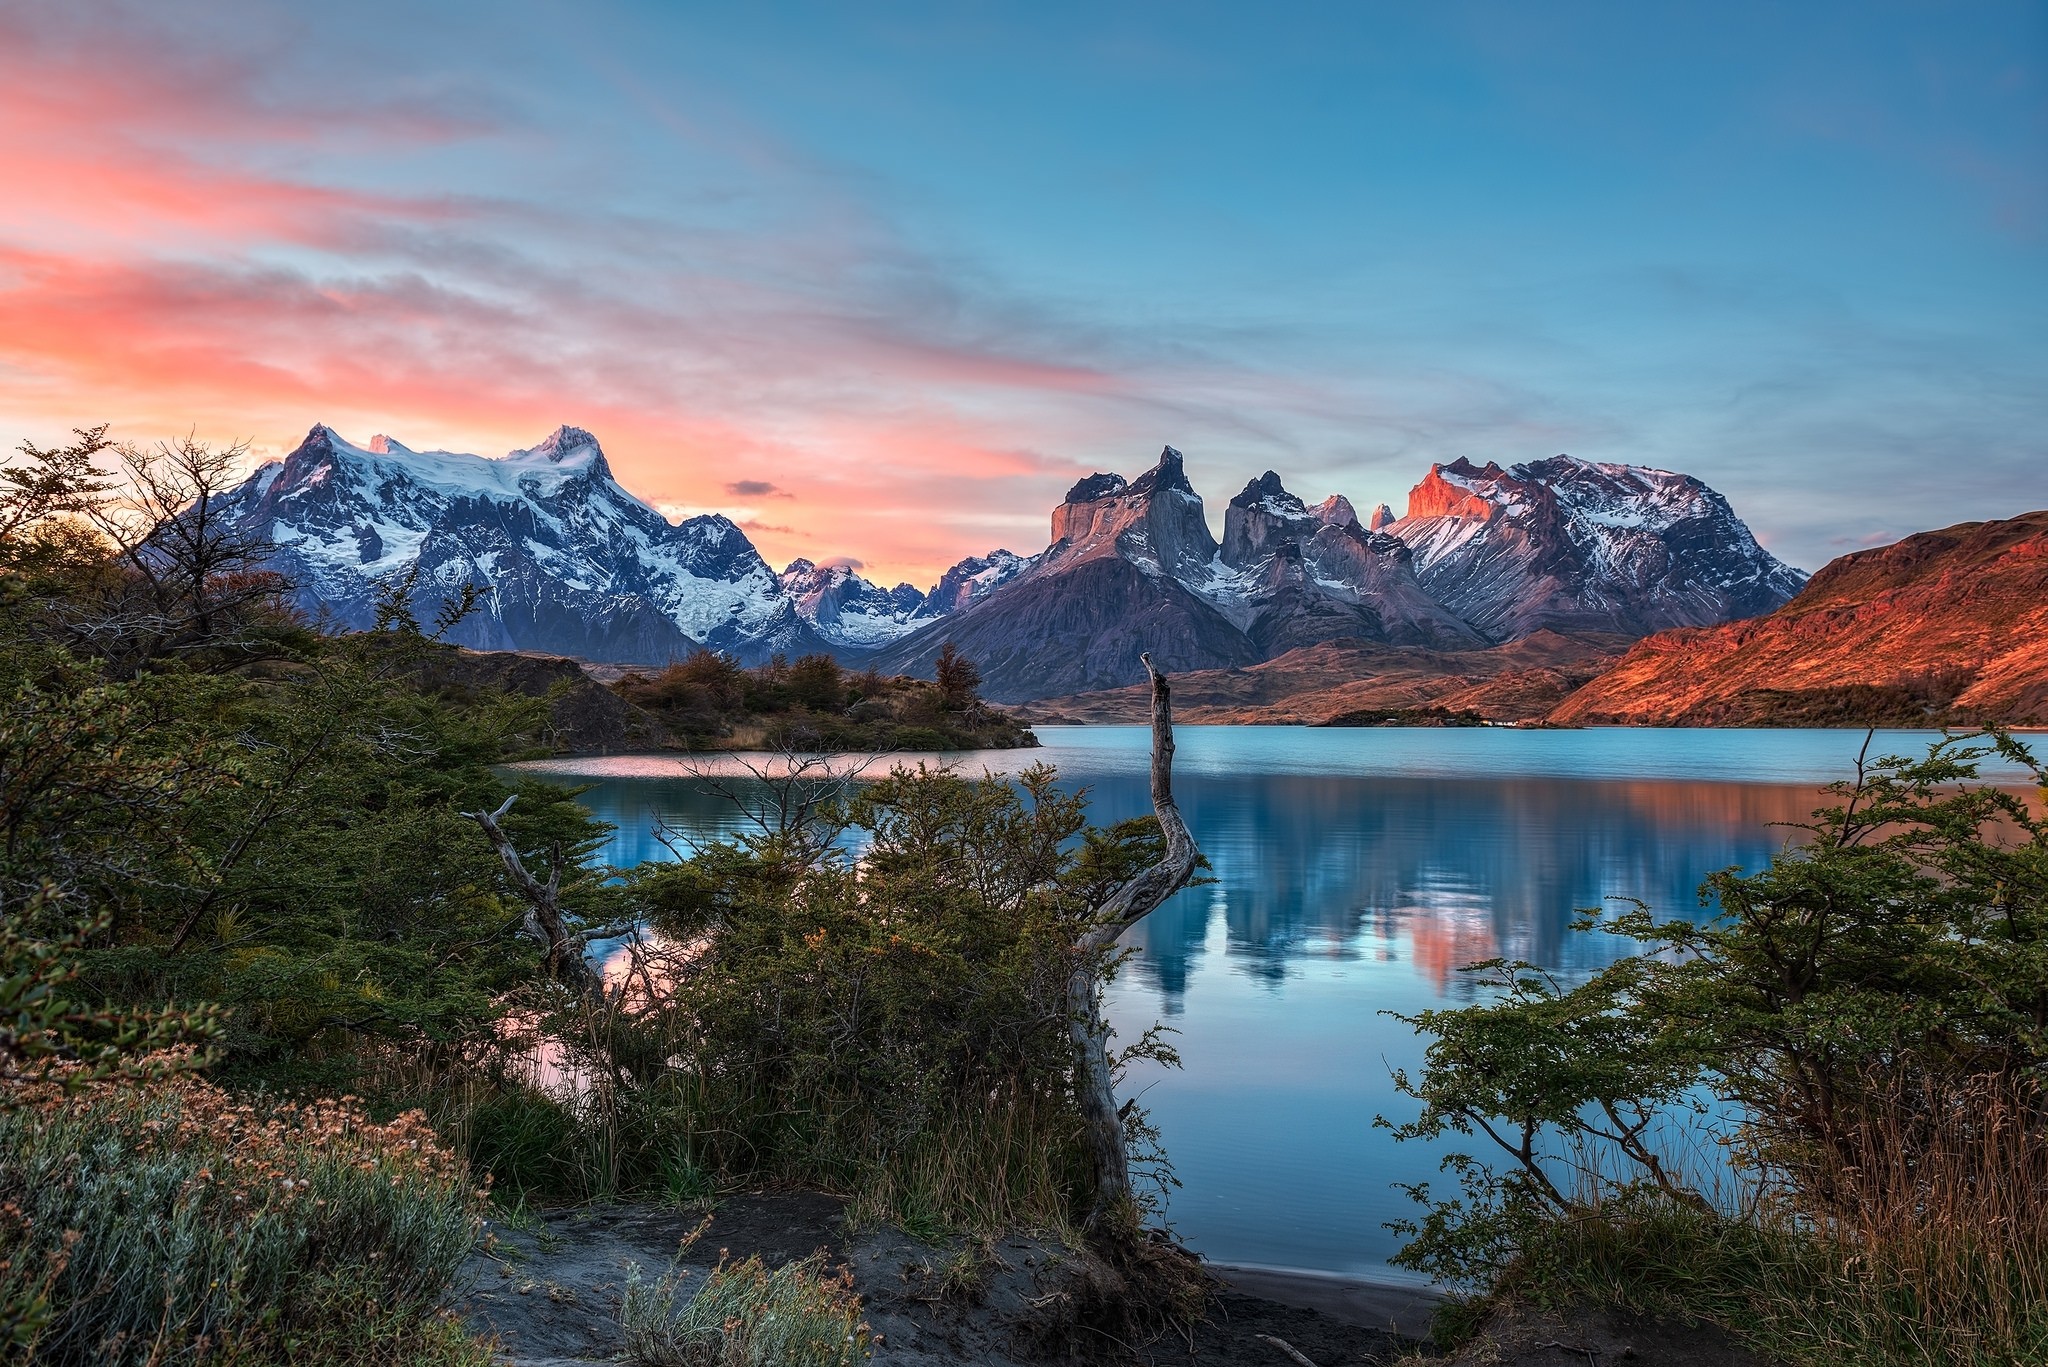 General 2048x1367 photography nature landscape mountains lake sunset shrubs snowy peak Torres del Paine national park Patagonia Chile South America